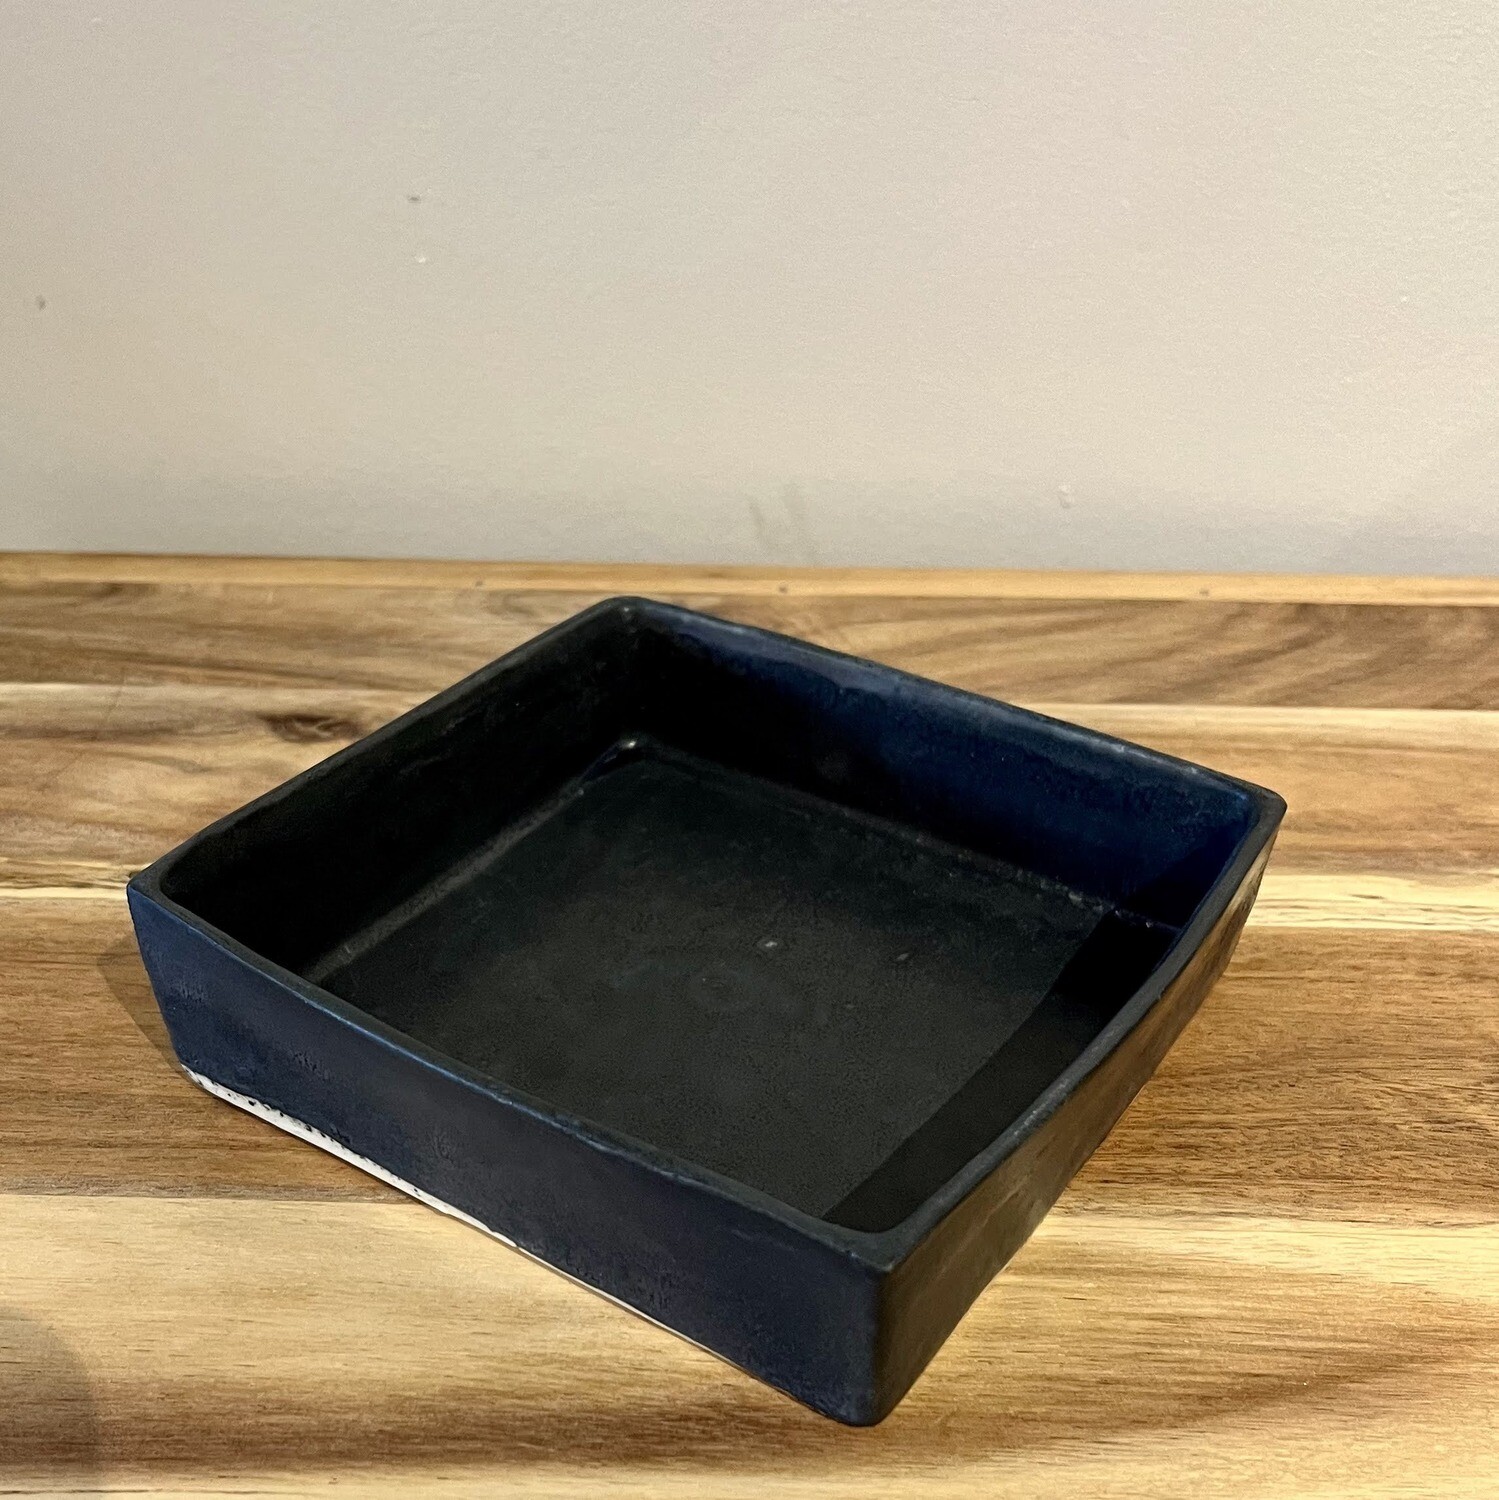 Large Square Tray